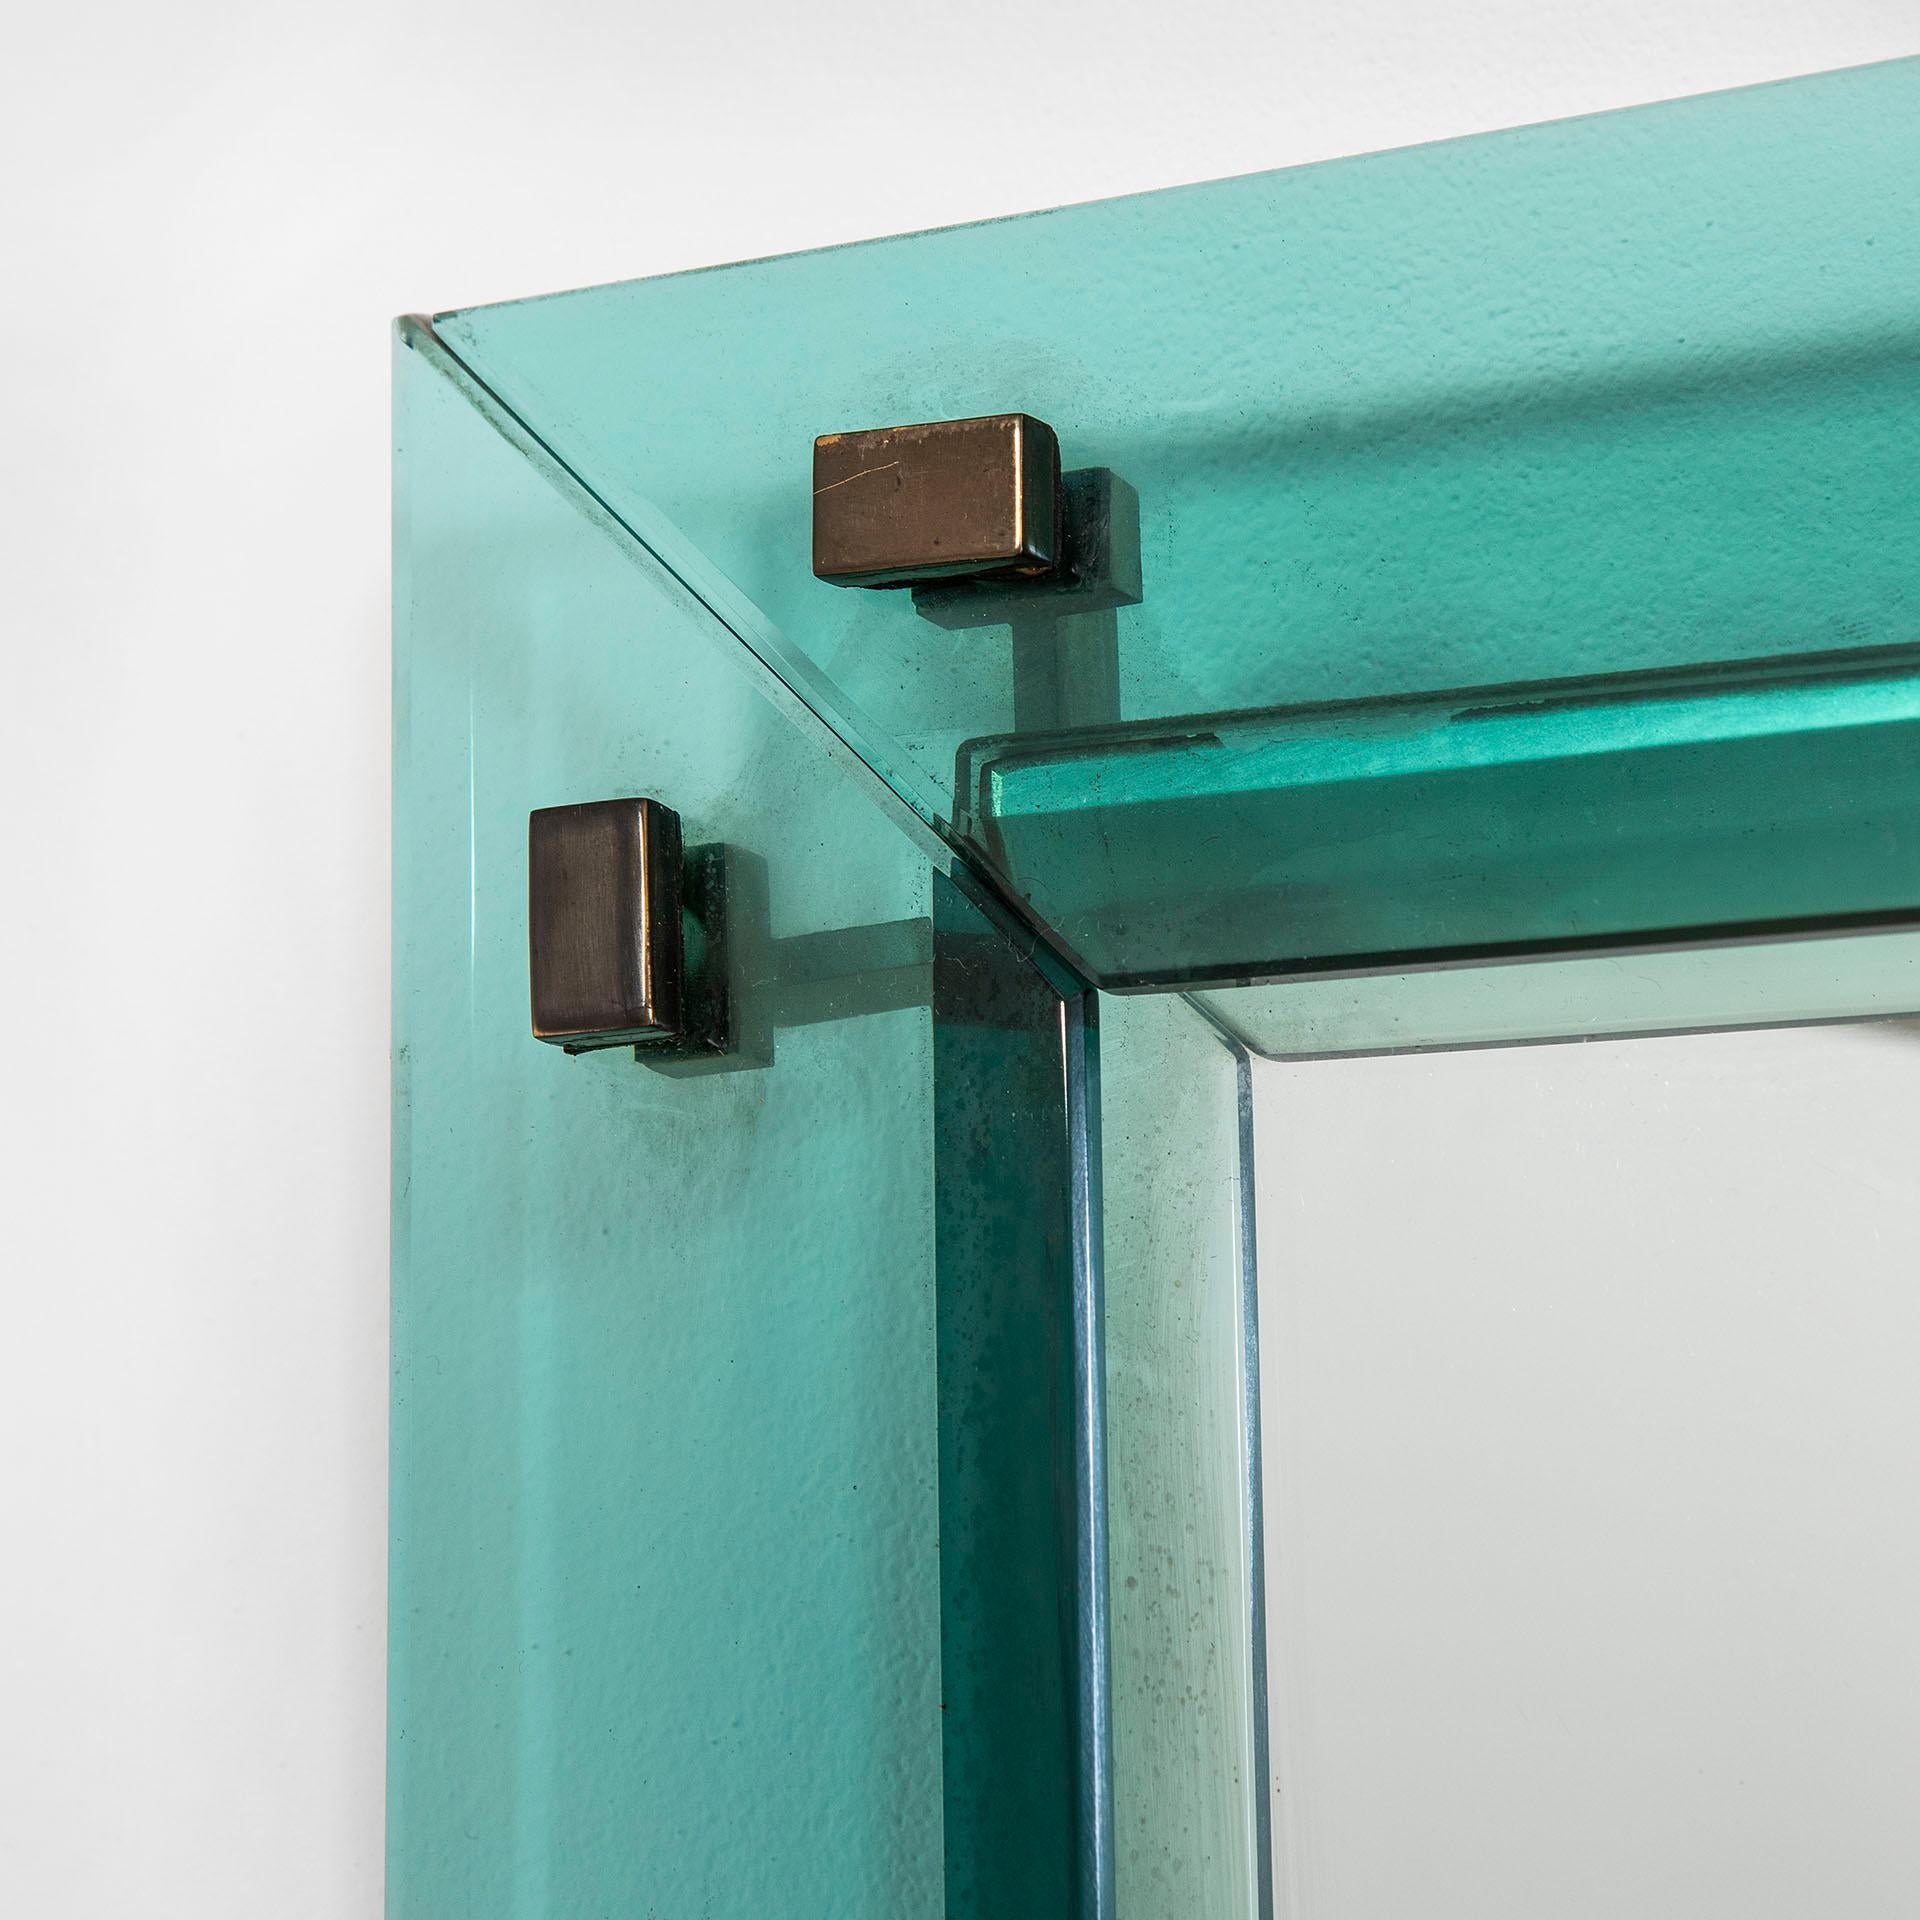 Wall mirror designed by the Master of Glass Max Ingrand for Fontana Arte in '50s. The mirror has a wonderful frame in colored and ground crystal, the colour is a light blue. The mirror itself is behind the frame. The frame is decorated with little